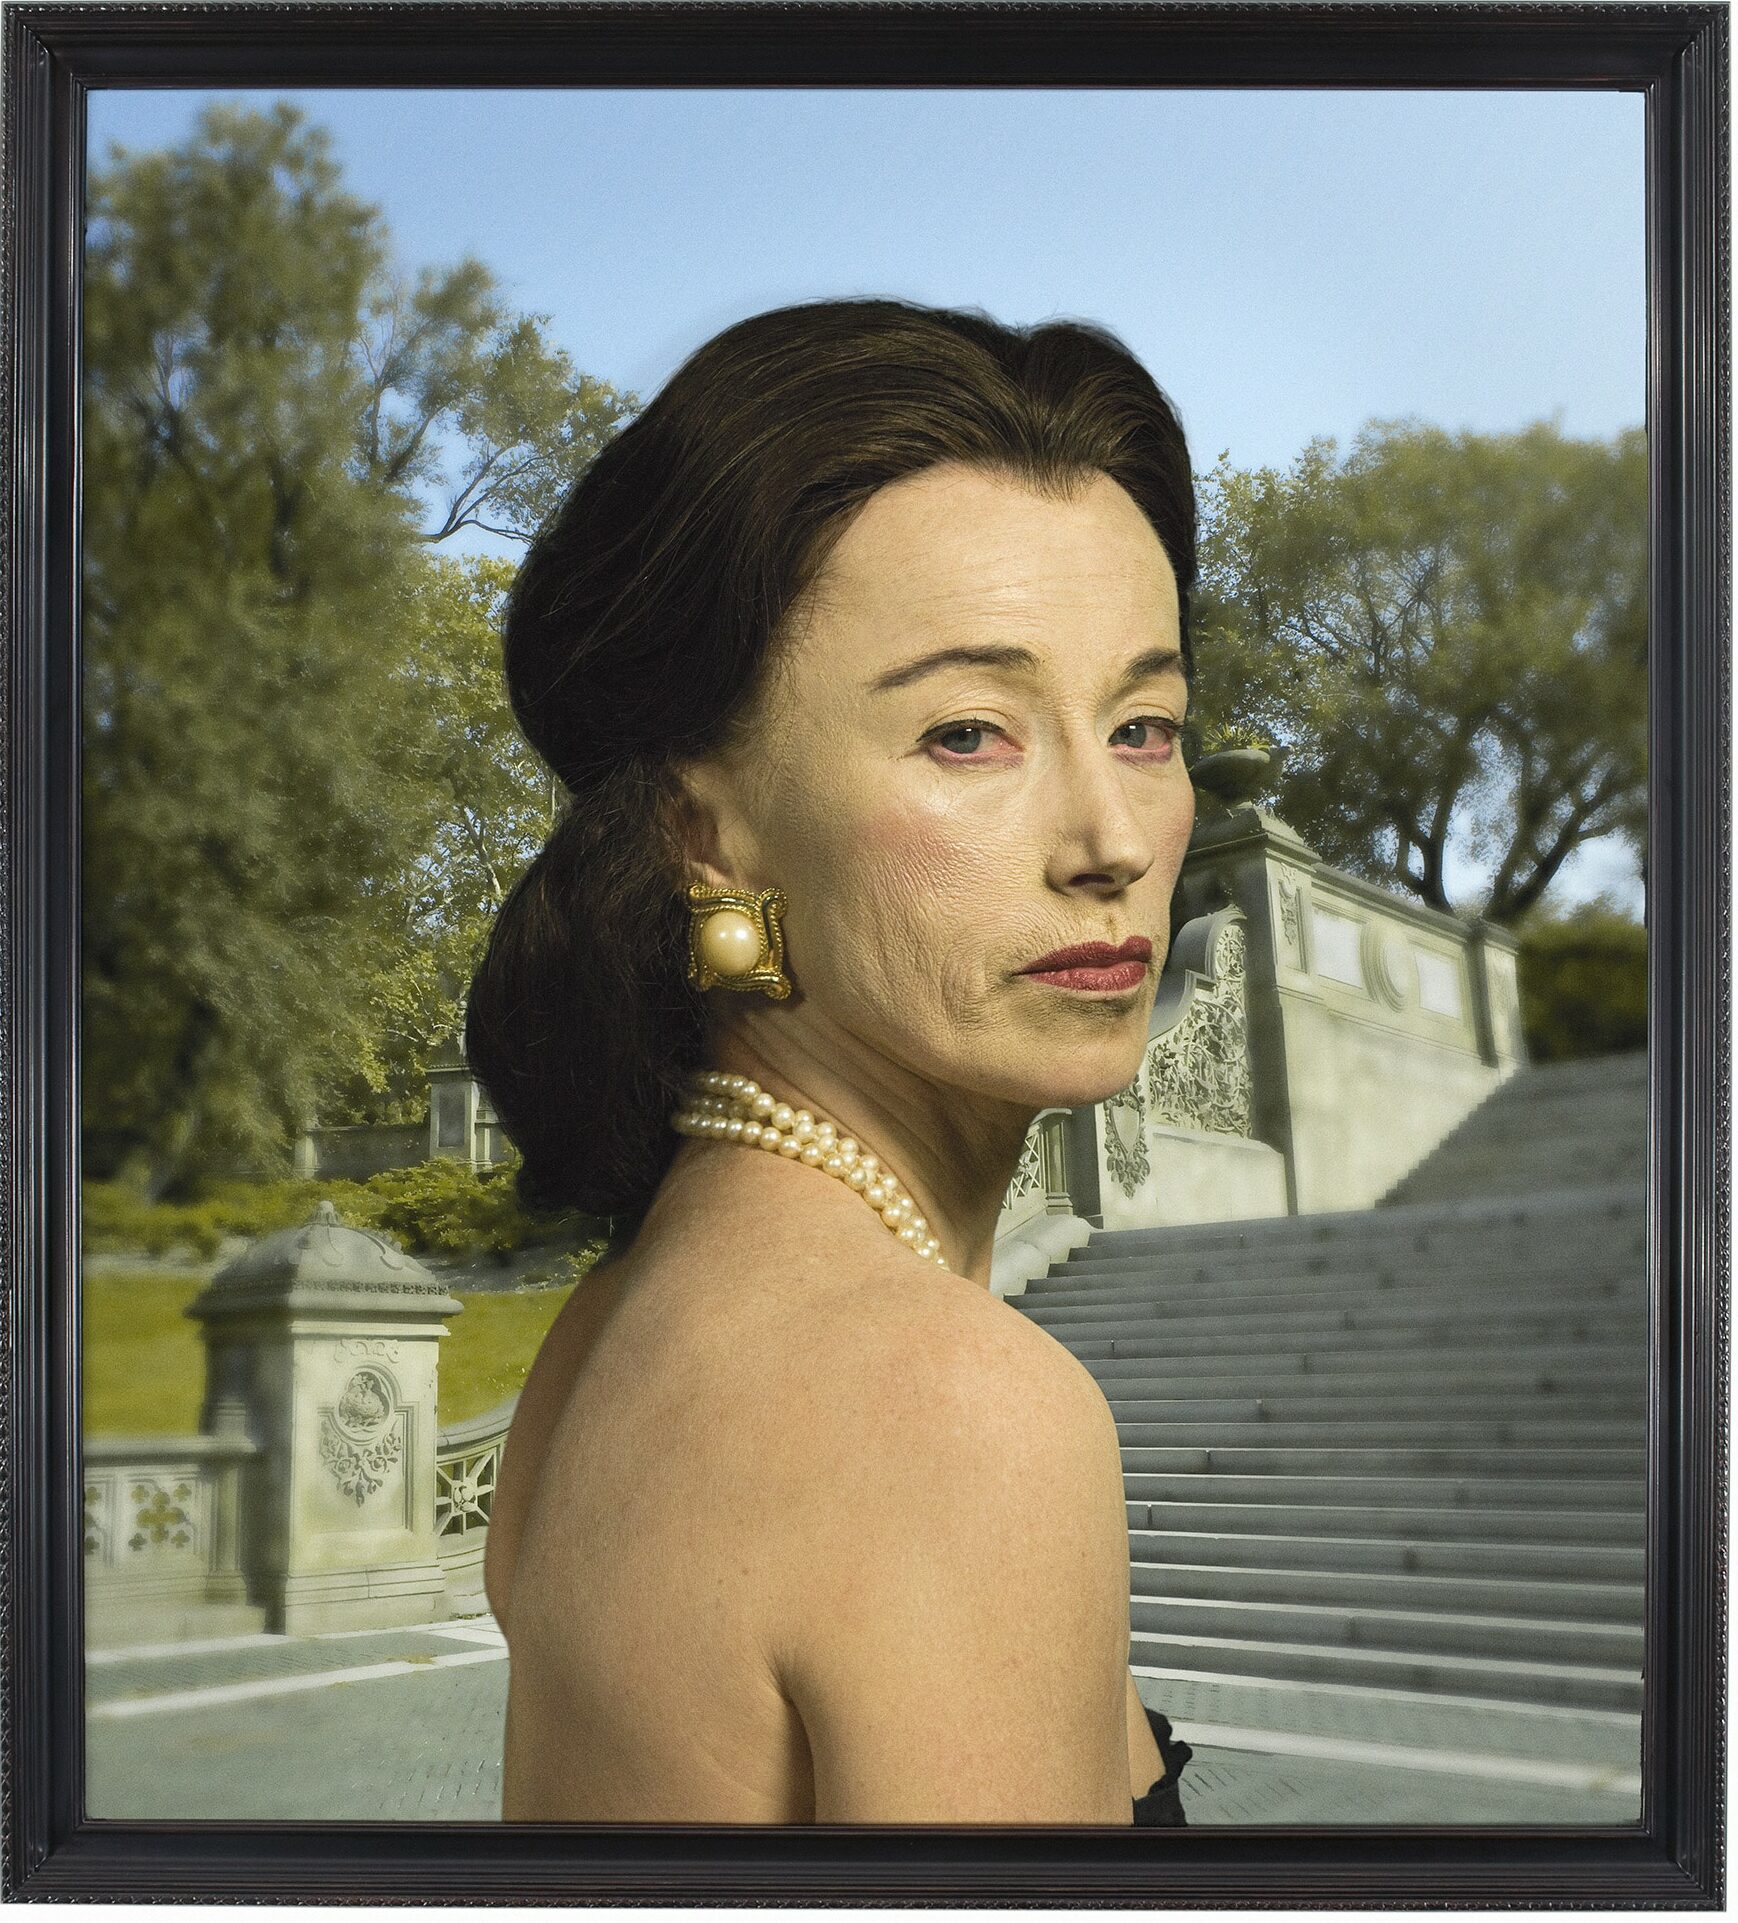 See How Cindy Sherman's Photography Evolved in Her New UK Survey